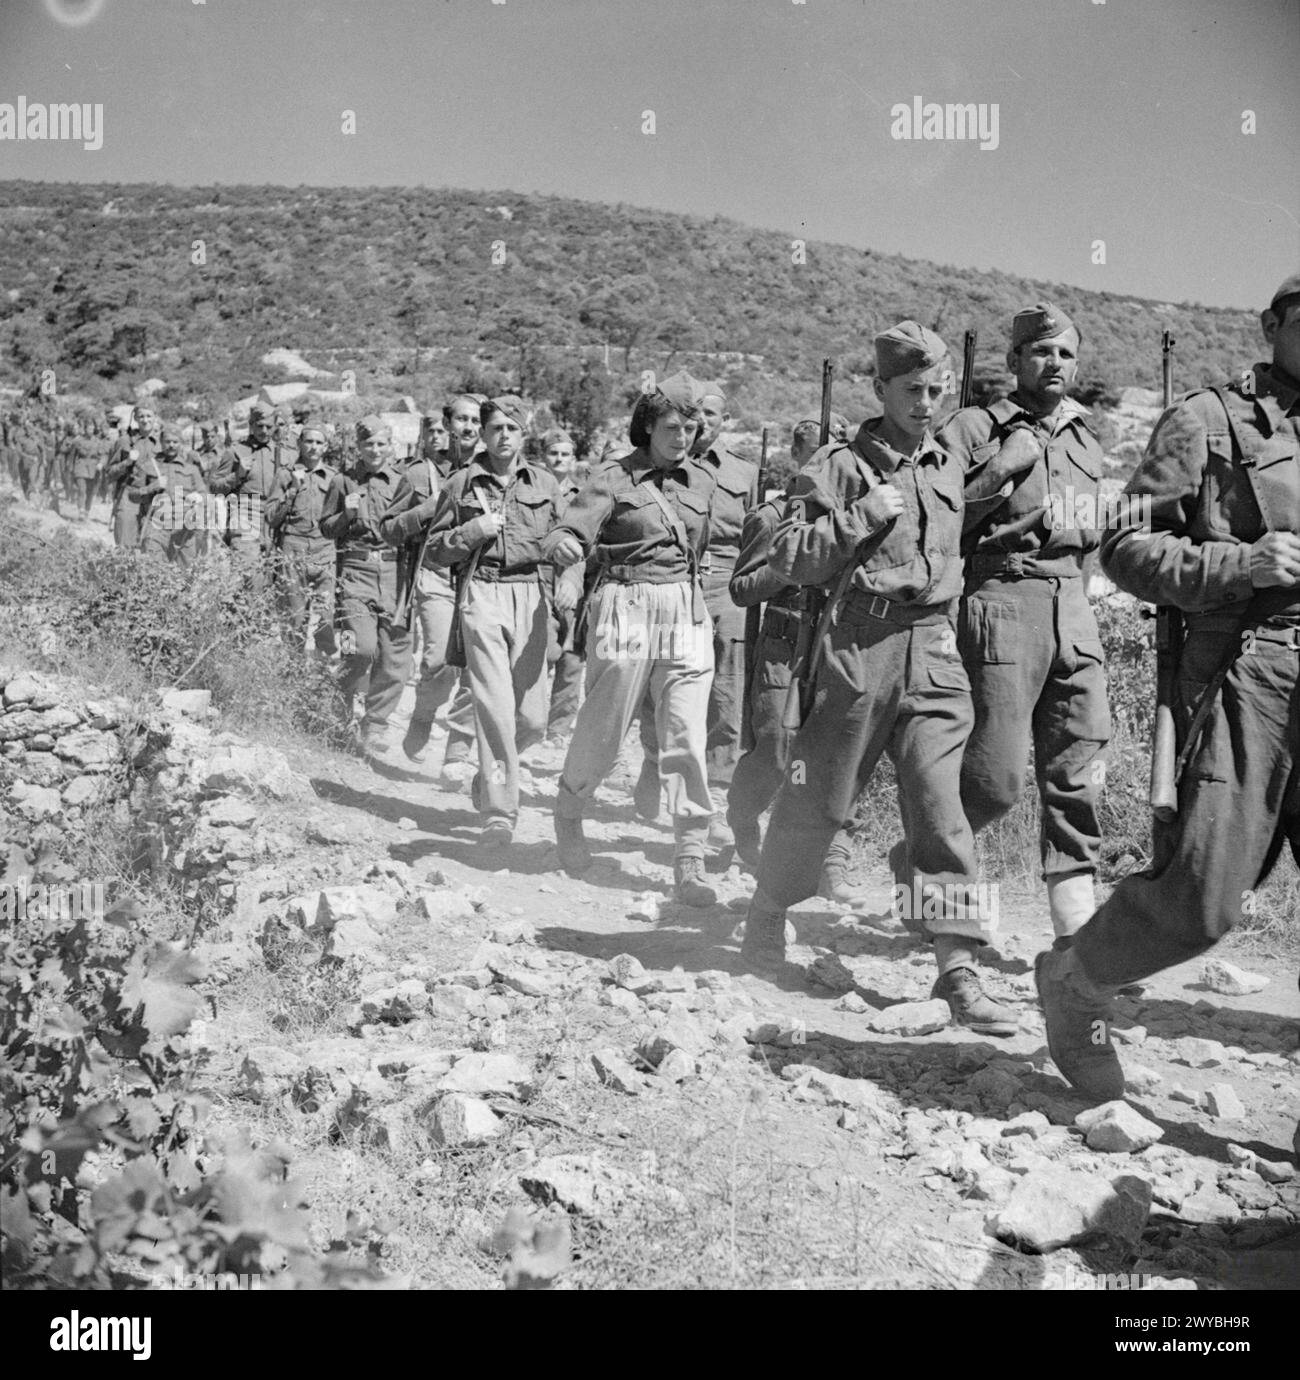 THE BRITISH ARMY IN THE ADRIATIC 1944 - Island of Vis off the coast of Yugoslavia. , Stock Photo